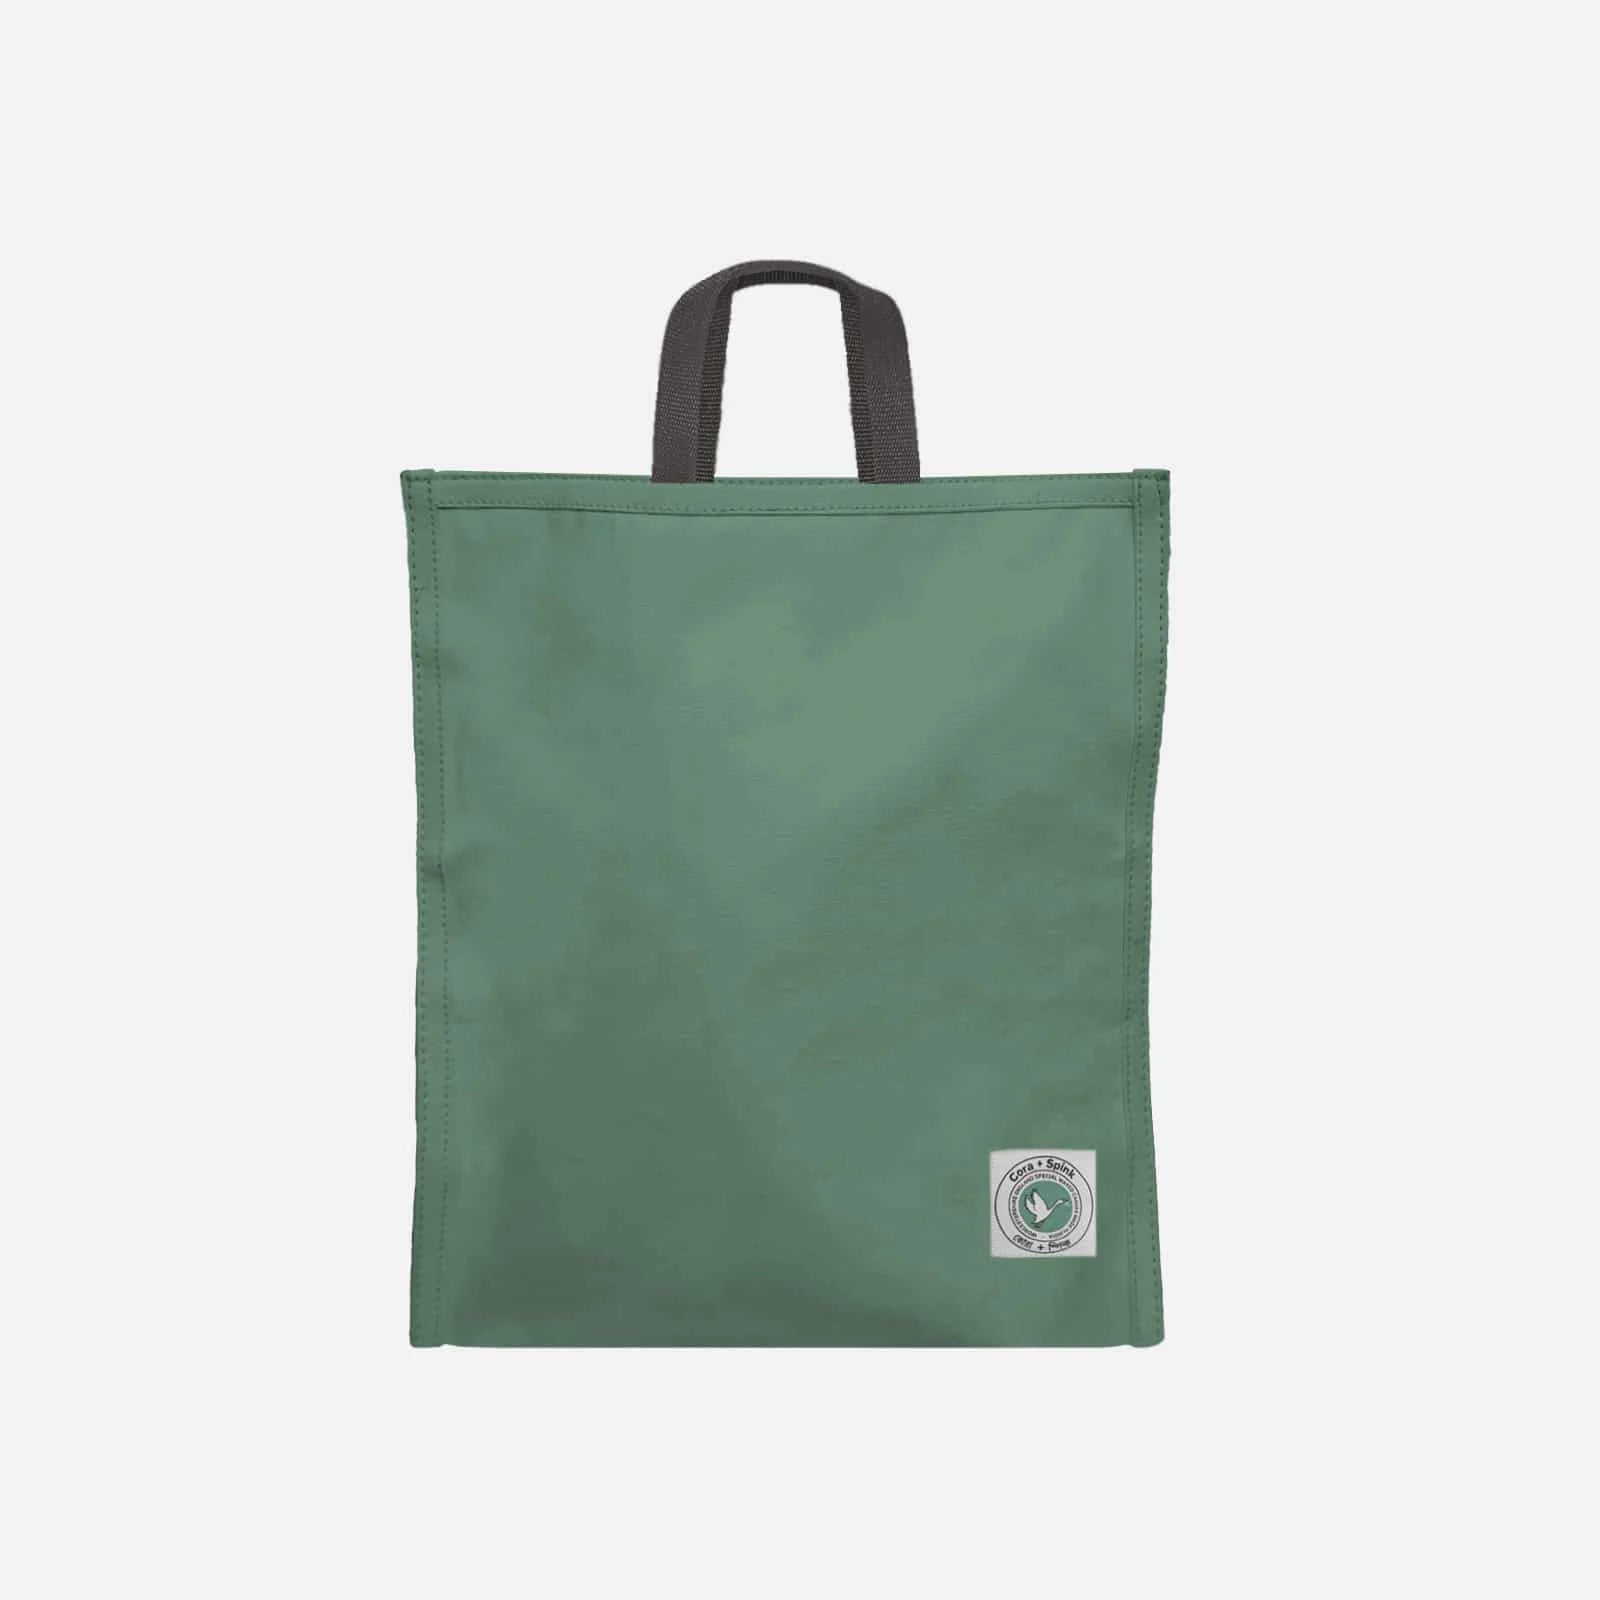 Cora+Spink - Goat Tote